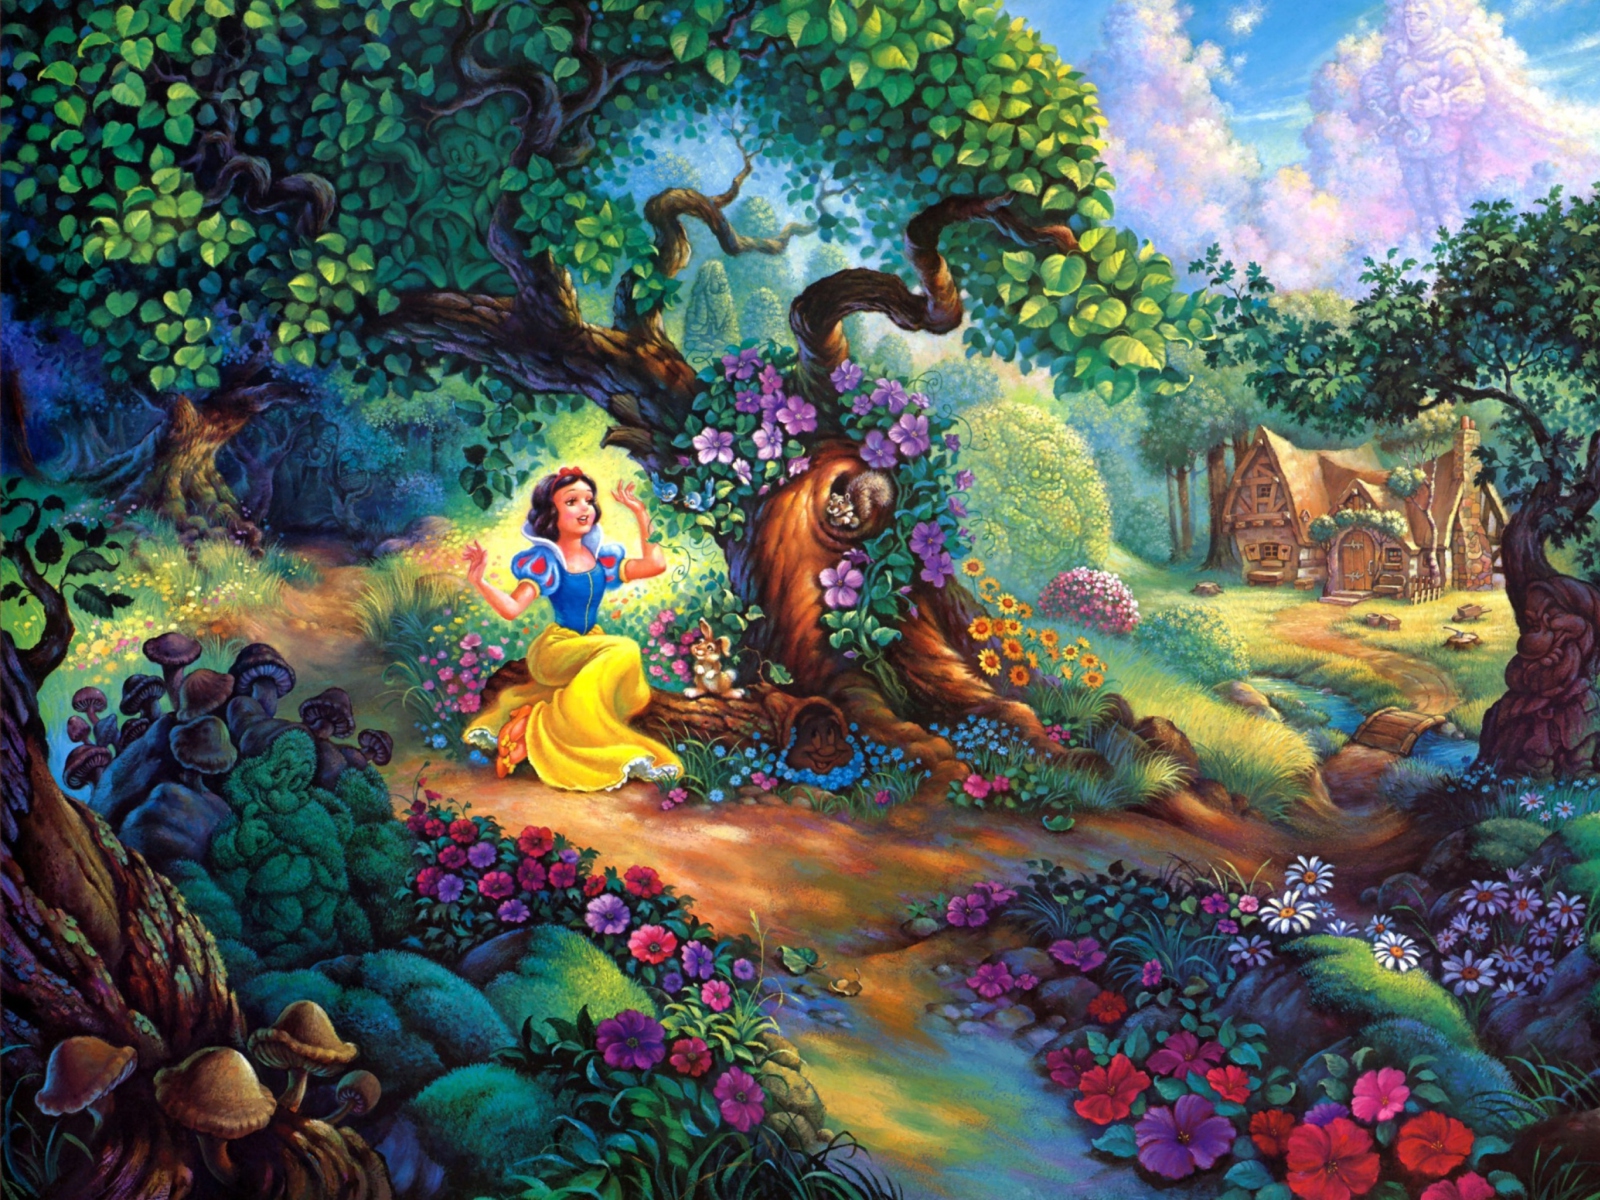 Snow White In Magical Forest wallpaper 1600x1200